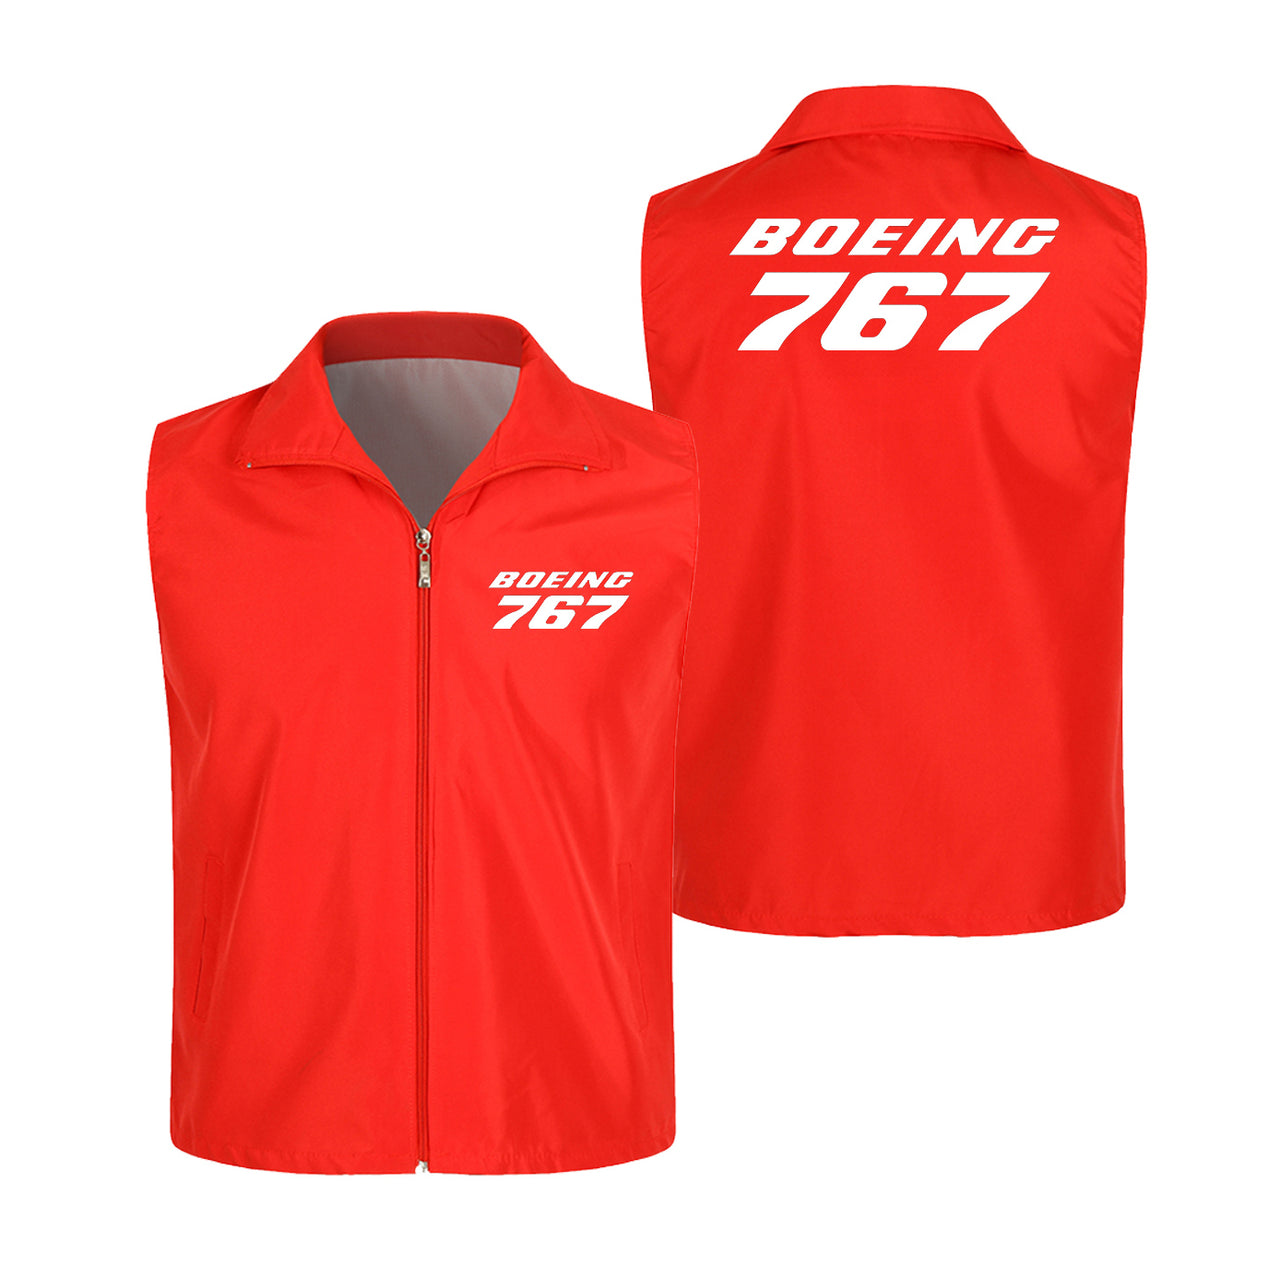 Boeing 767 & Text Designed Thin Style Vests